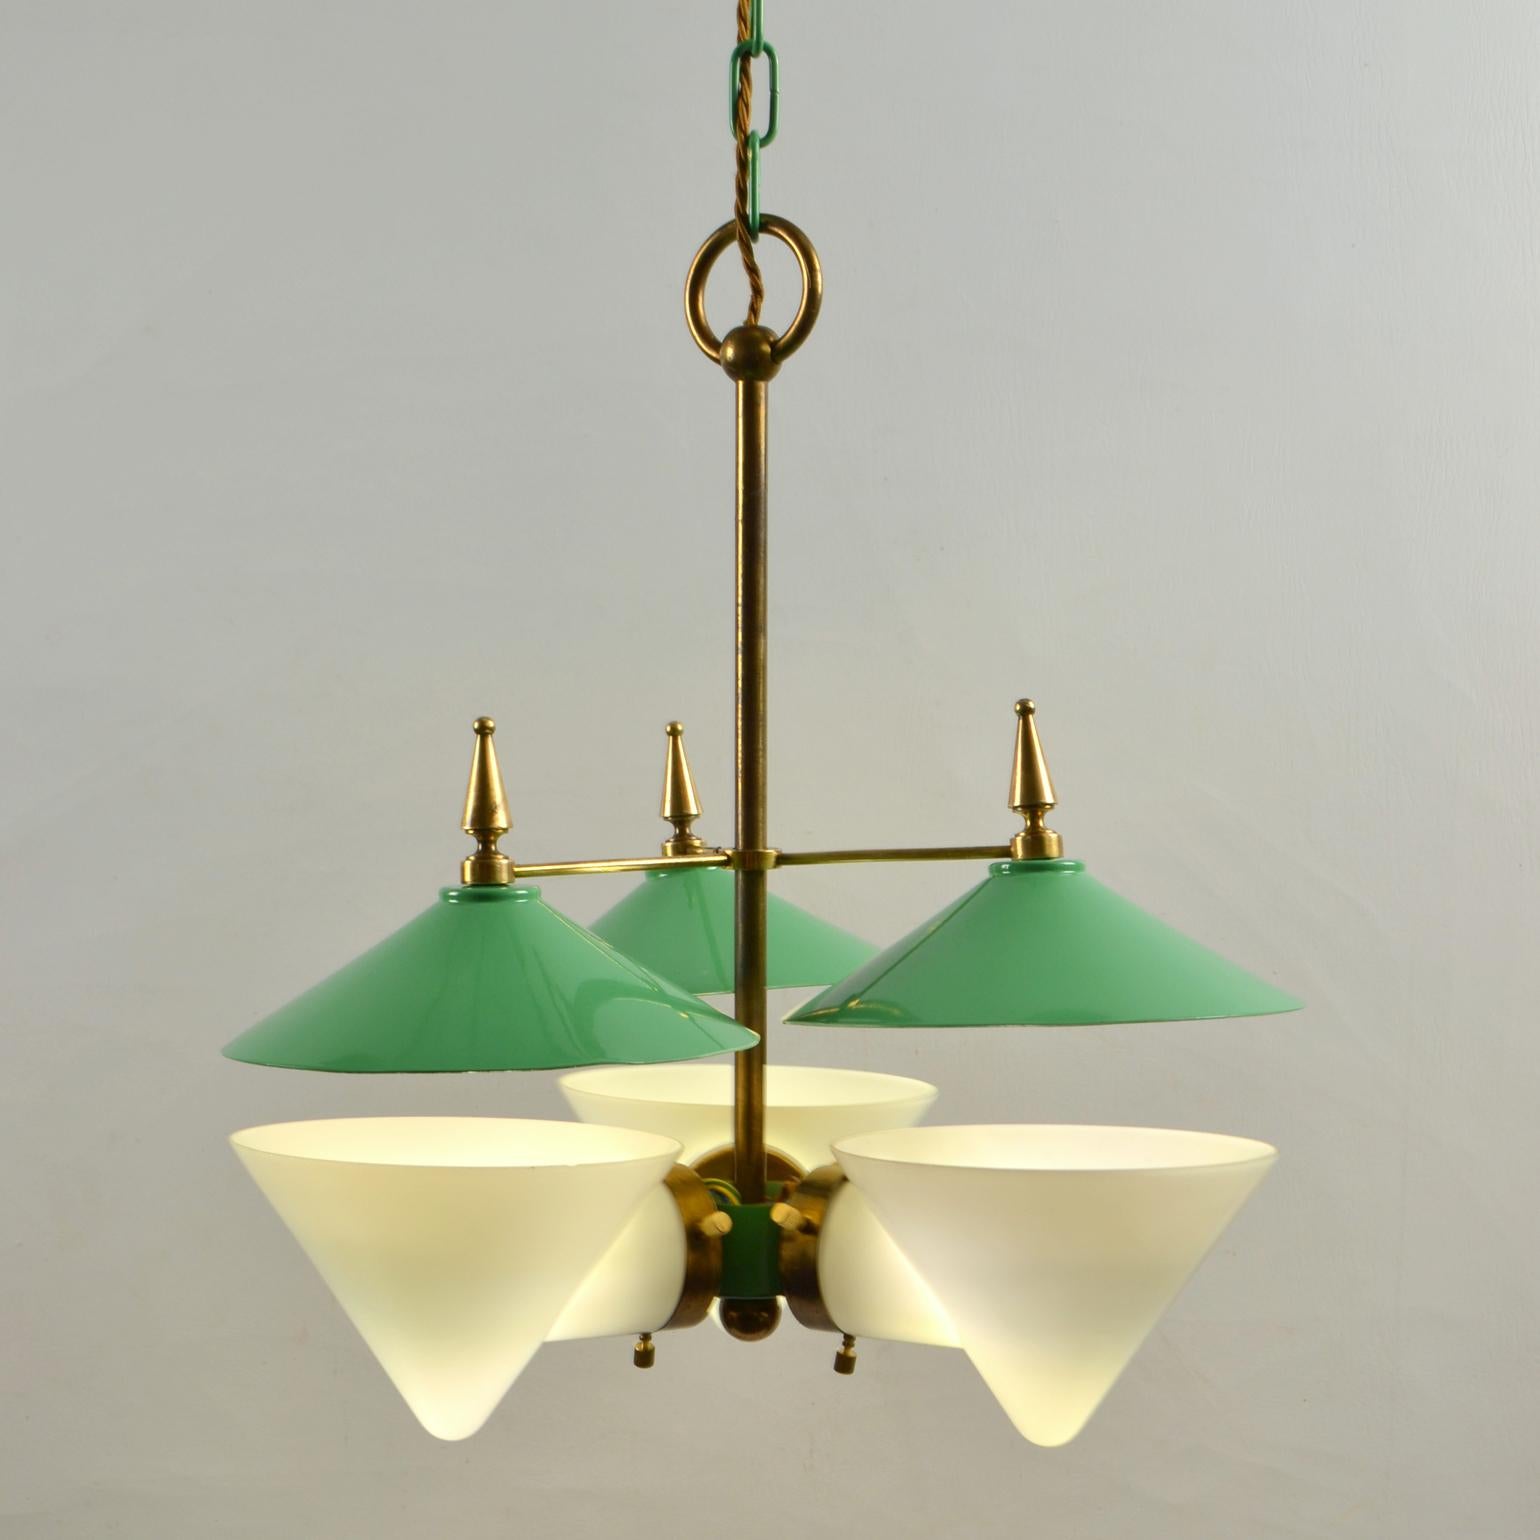 Extraordinary rare three arm 1950's French chandelier featuring a double conical shade made in two parts, the bottom part in opal glass and the cone shape reflector spun in classic 1950's green enameled aluminum with brass details and fixtures is